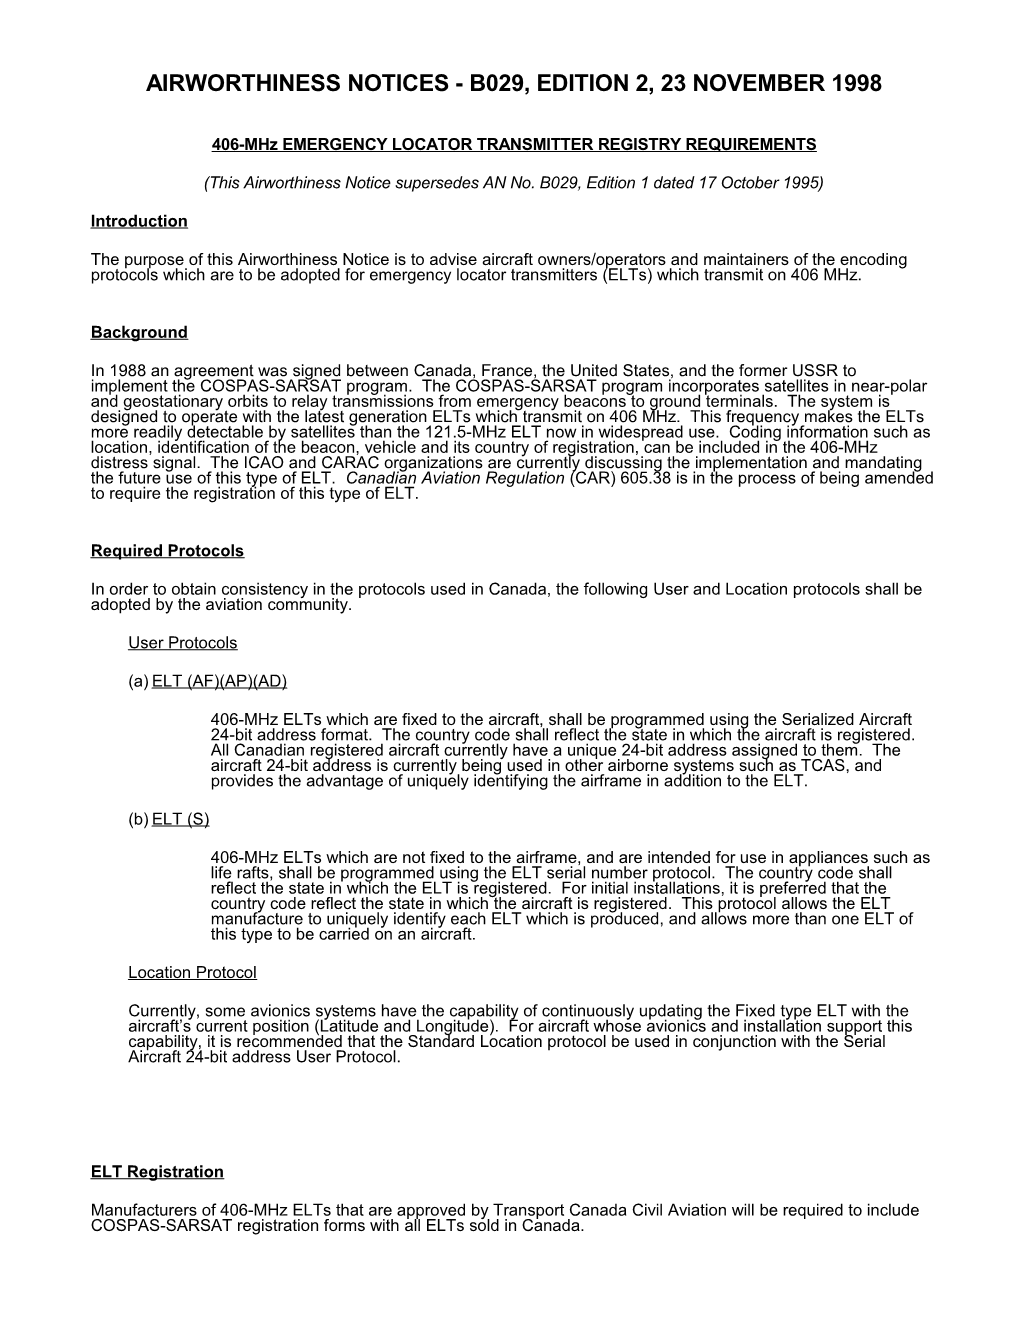 Airworthiness Notices - B029, Edition 2, 23 November 1998